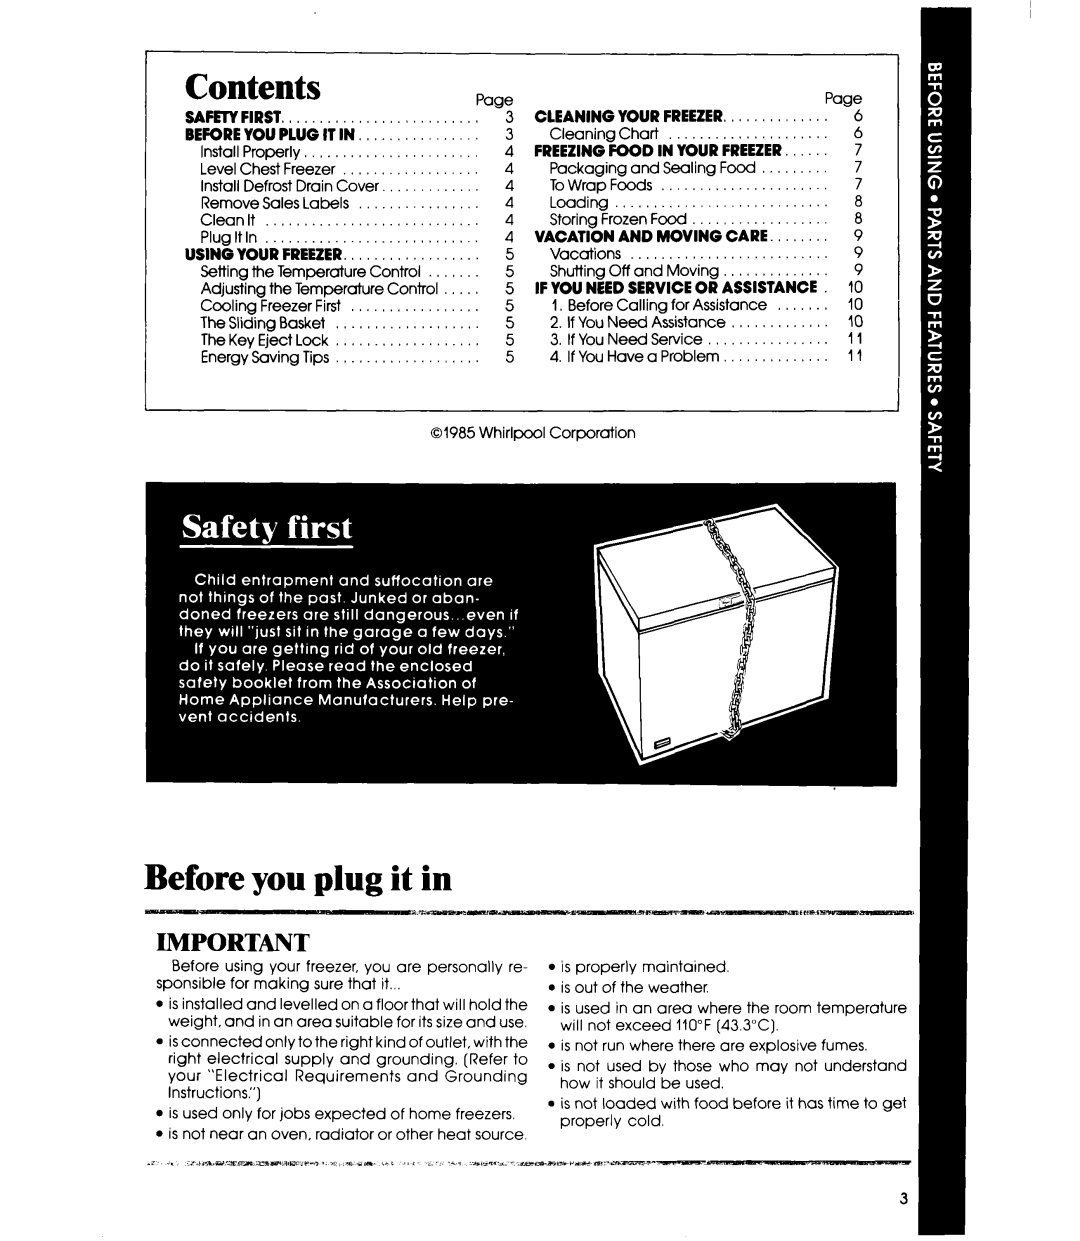 Whirlpool EH12OC EH15OC manual Contents, Before you plug it in, Safei’Yfirst, Beforeyouplugitin, Using Your Freezer 